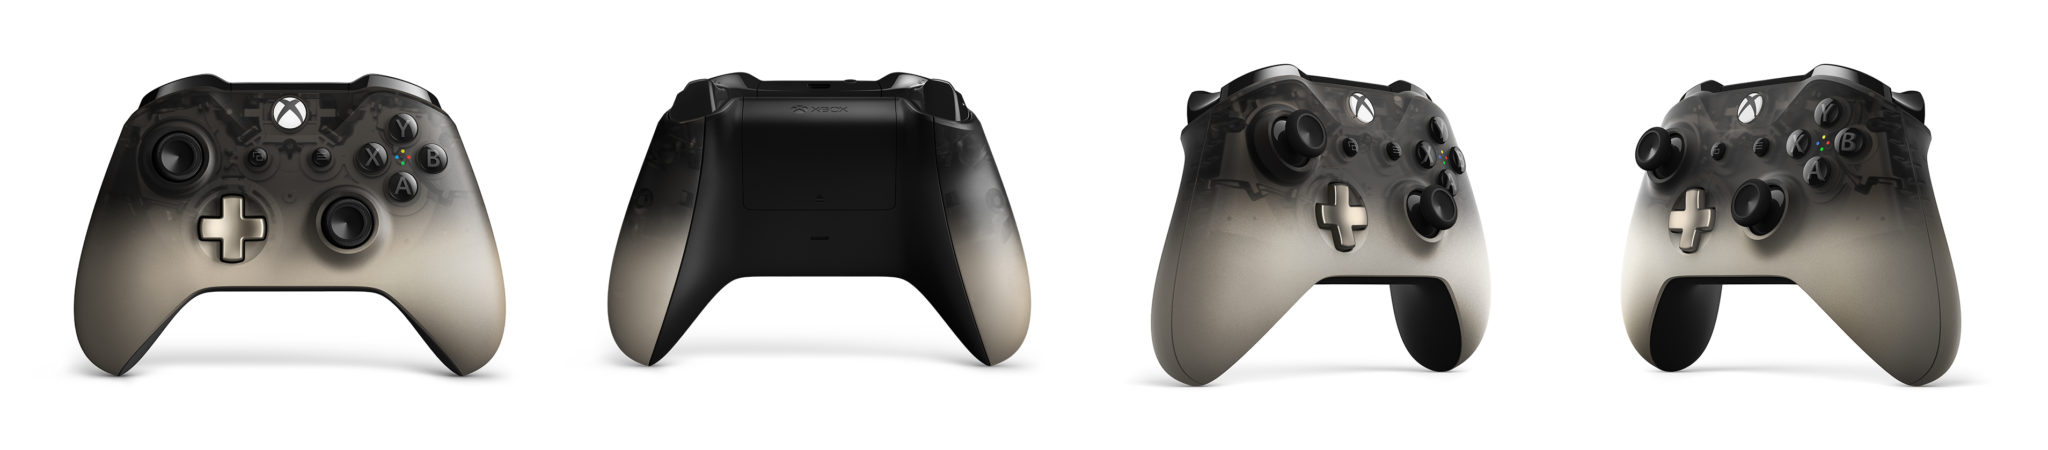 Add Something New to Your Xbox Controller Collection